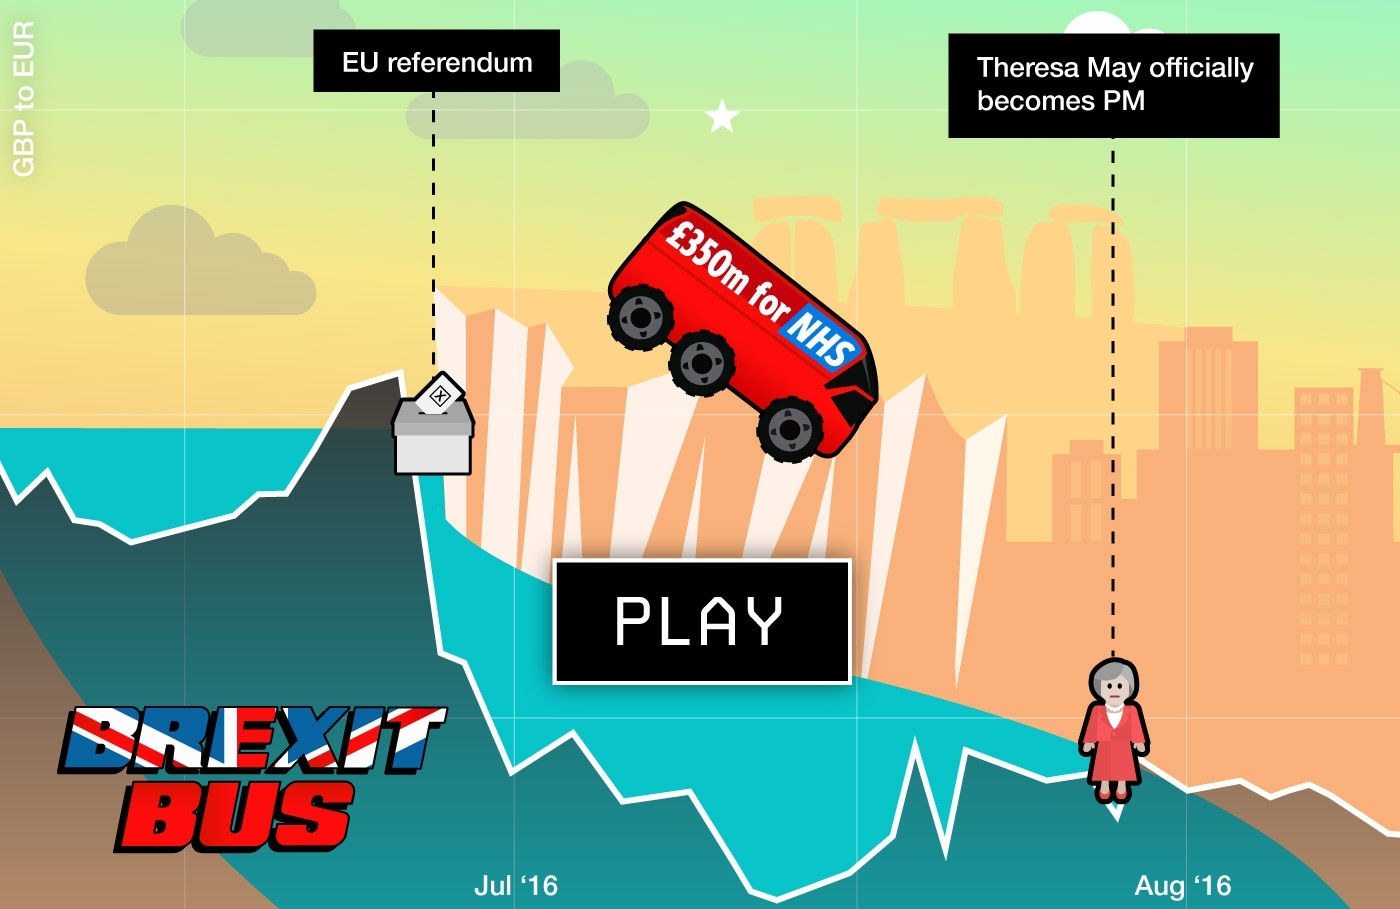 There's a Brexit bus game where you can steer it and hope it doesn't crash into oblivion1400 x 909